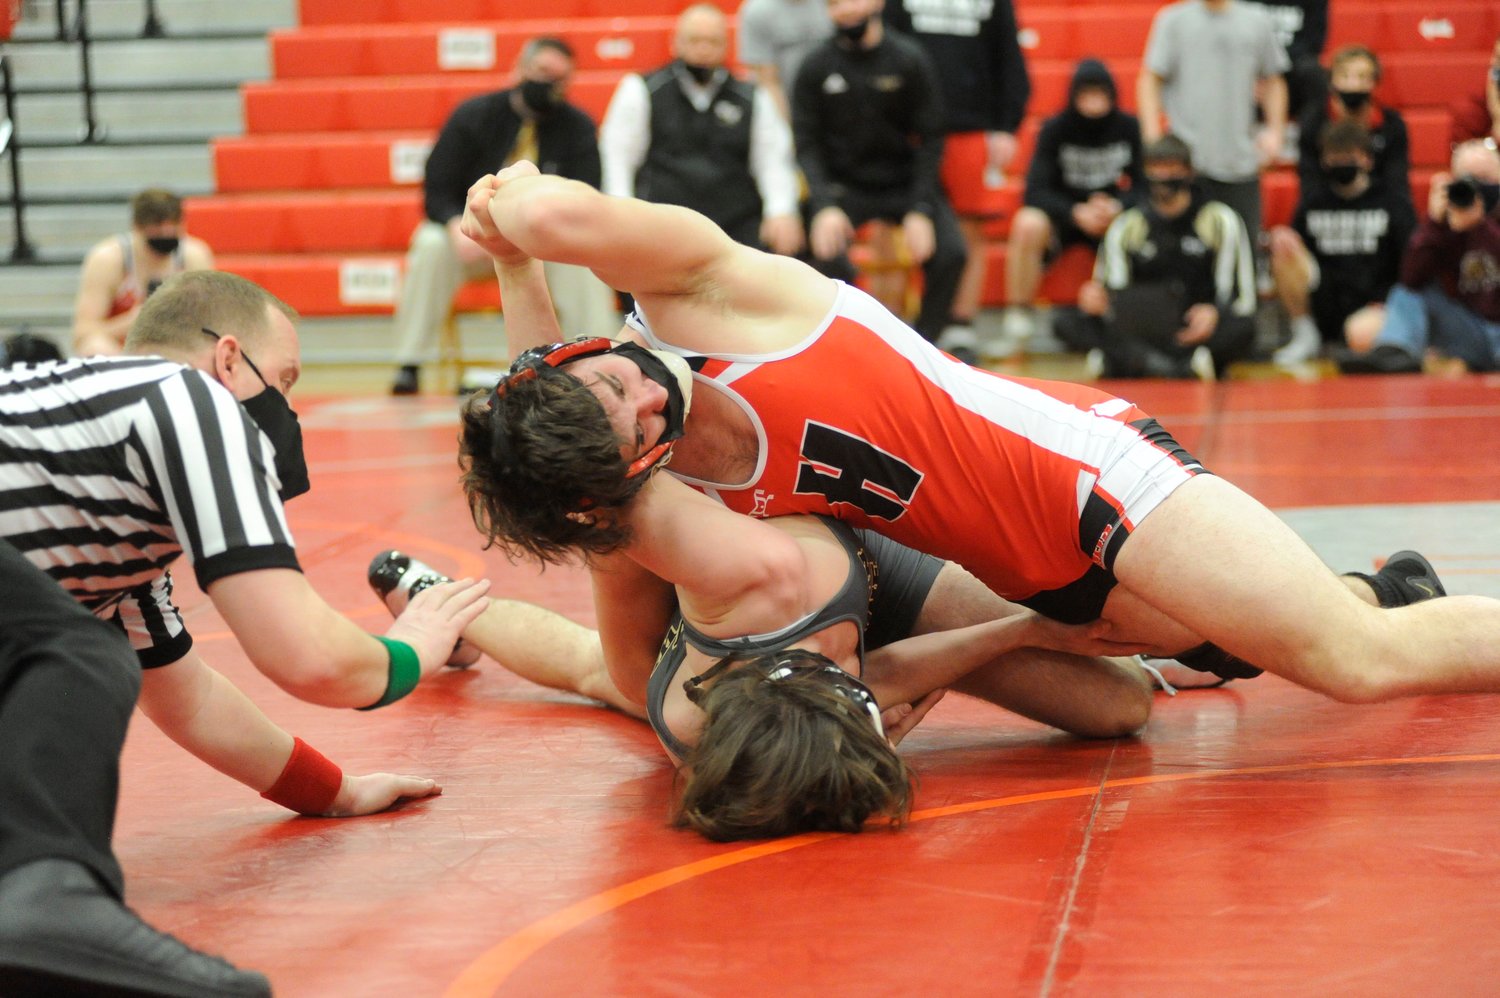 Crowned champion. In bout #14, Honesdale’s Tim Dailey won a hard-fought 1l-7 decision over his opponent. At the District AA tourney, Dailey was tabbed champ in the 189-pound weight class.